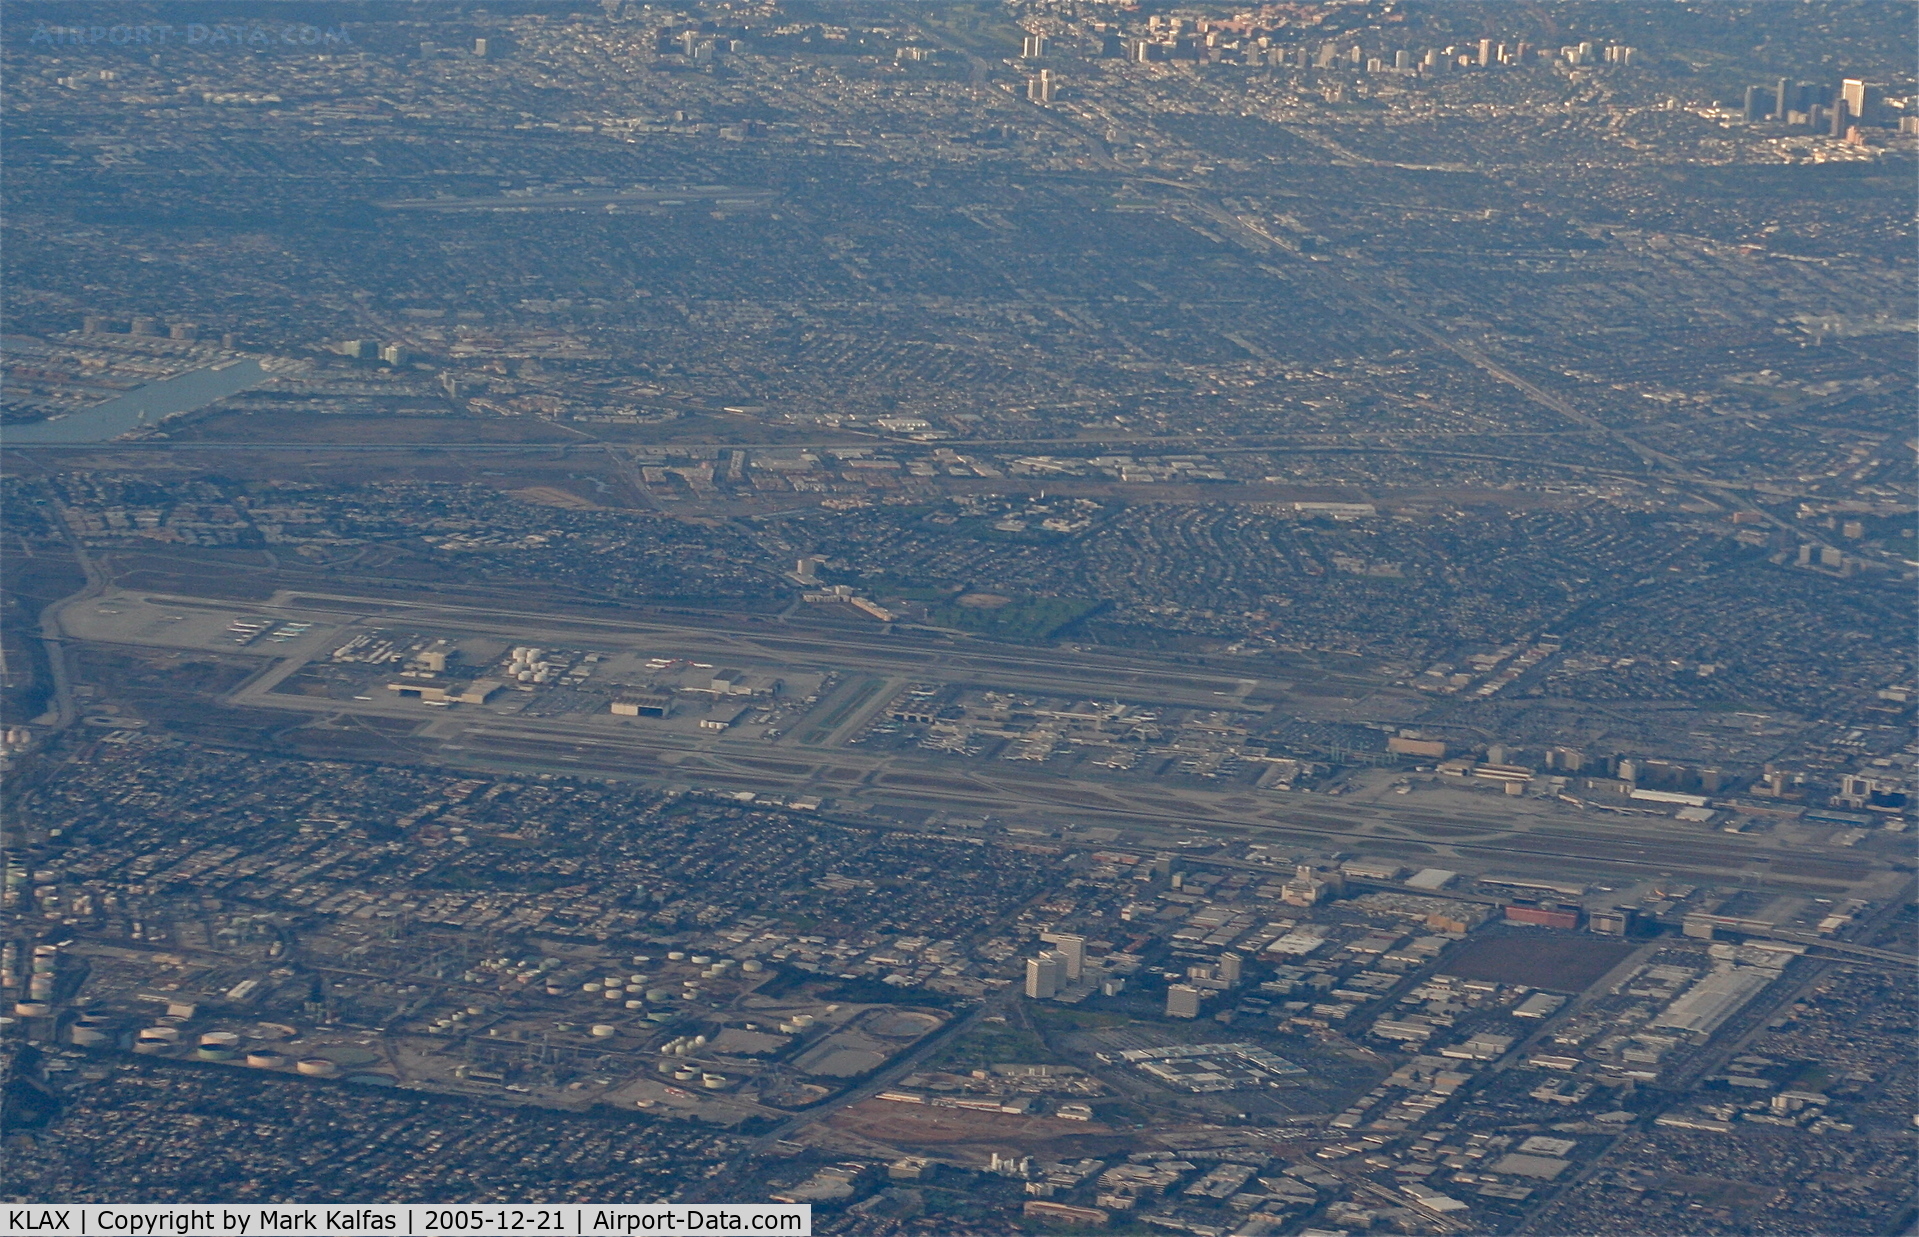 Los Angeles International Airport (LAX) - LAX as seen climbing through 15.000 en route to ORD.